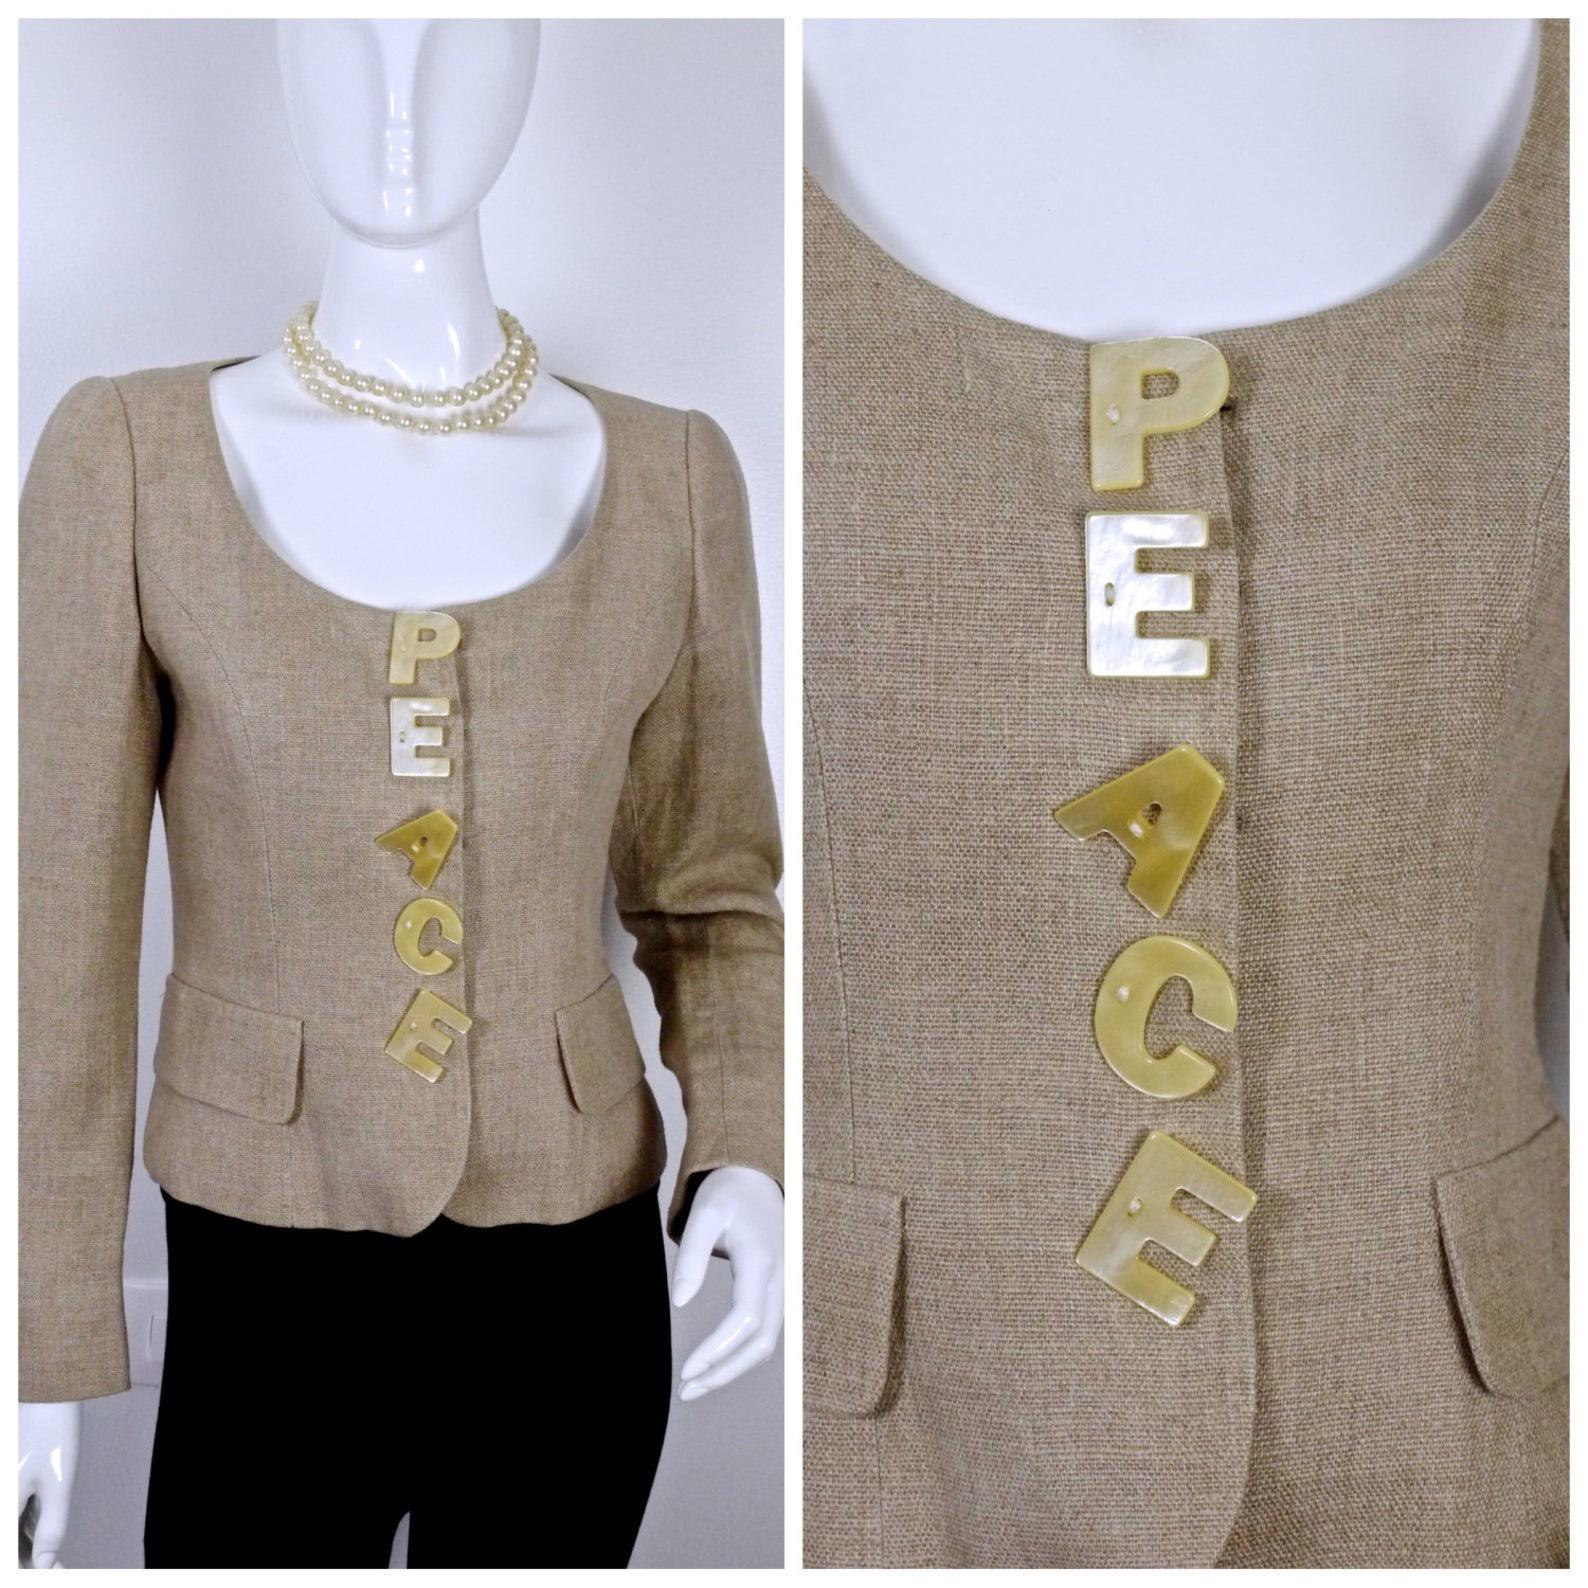 Vintage MOSCHINO PEACE Novelty Linen Jacket

Measurements taken laid flat, please double bust and waist:
Shoulder: 14.5 inches
Sleeves: 24 inches
Bust: 17.5 inches
Waist: 15 inches
Length: 20.5 inches

Features:
- 100% Authentic MOSCHINO.
- Big